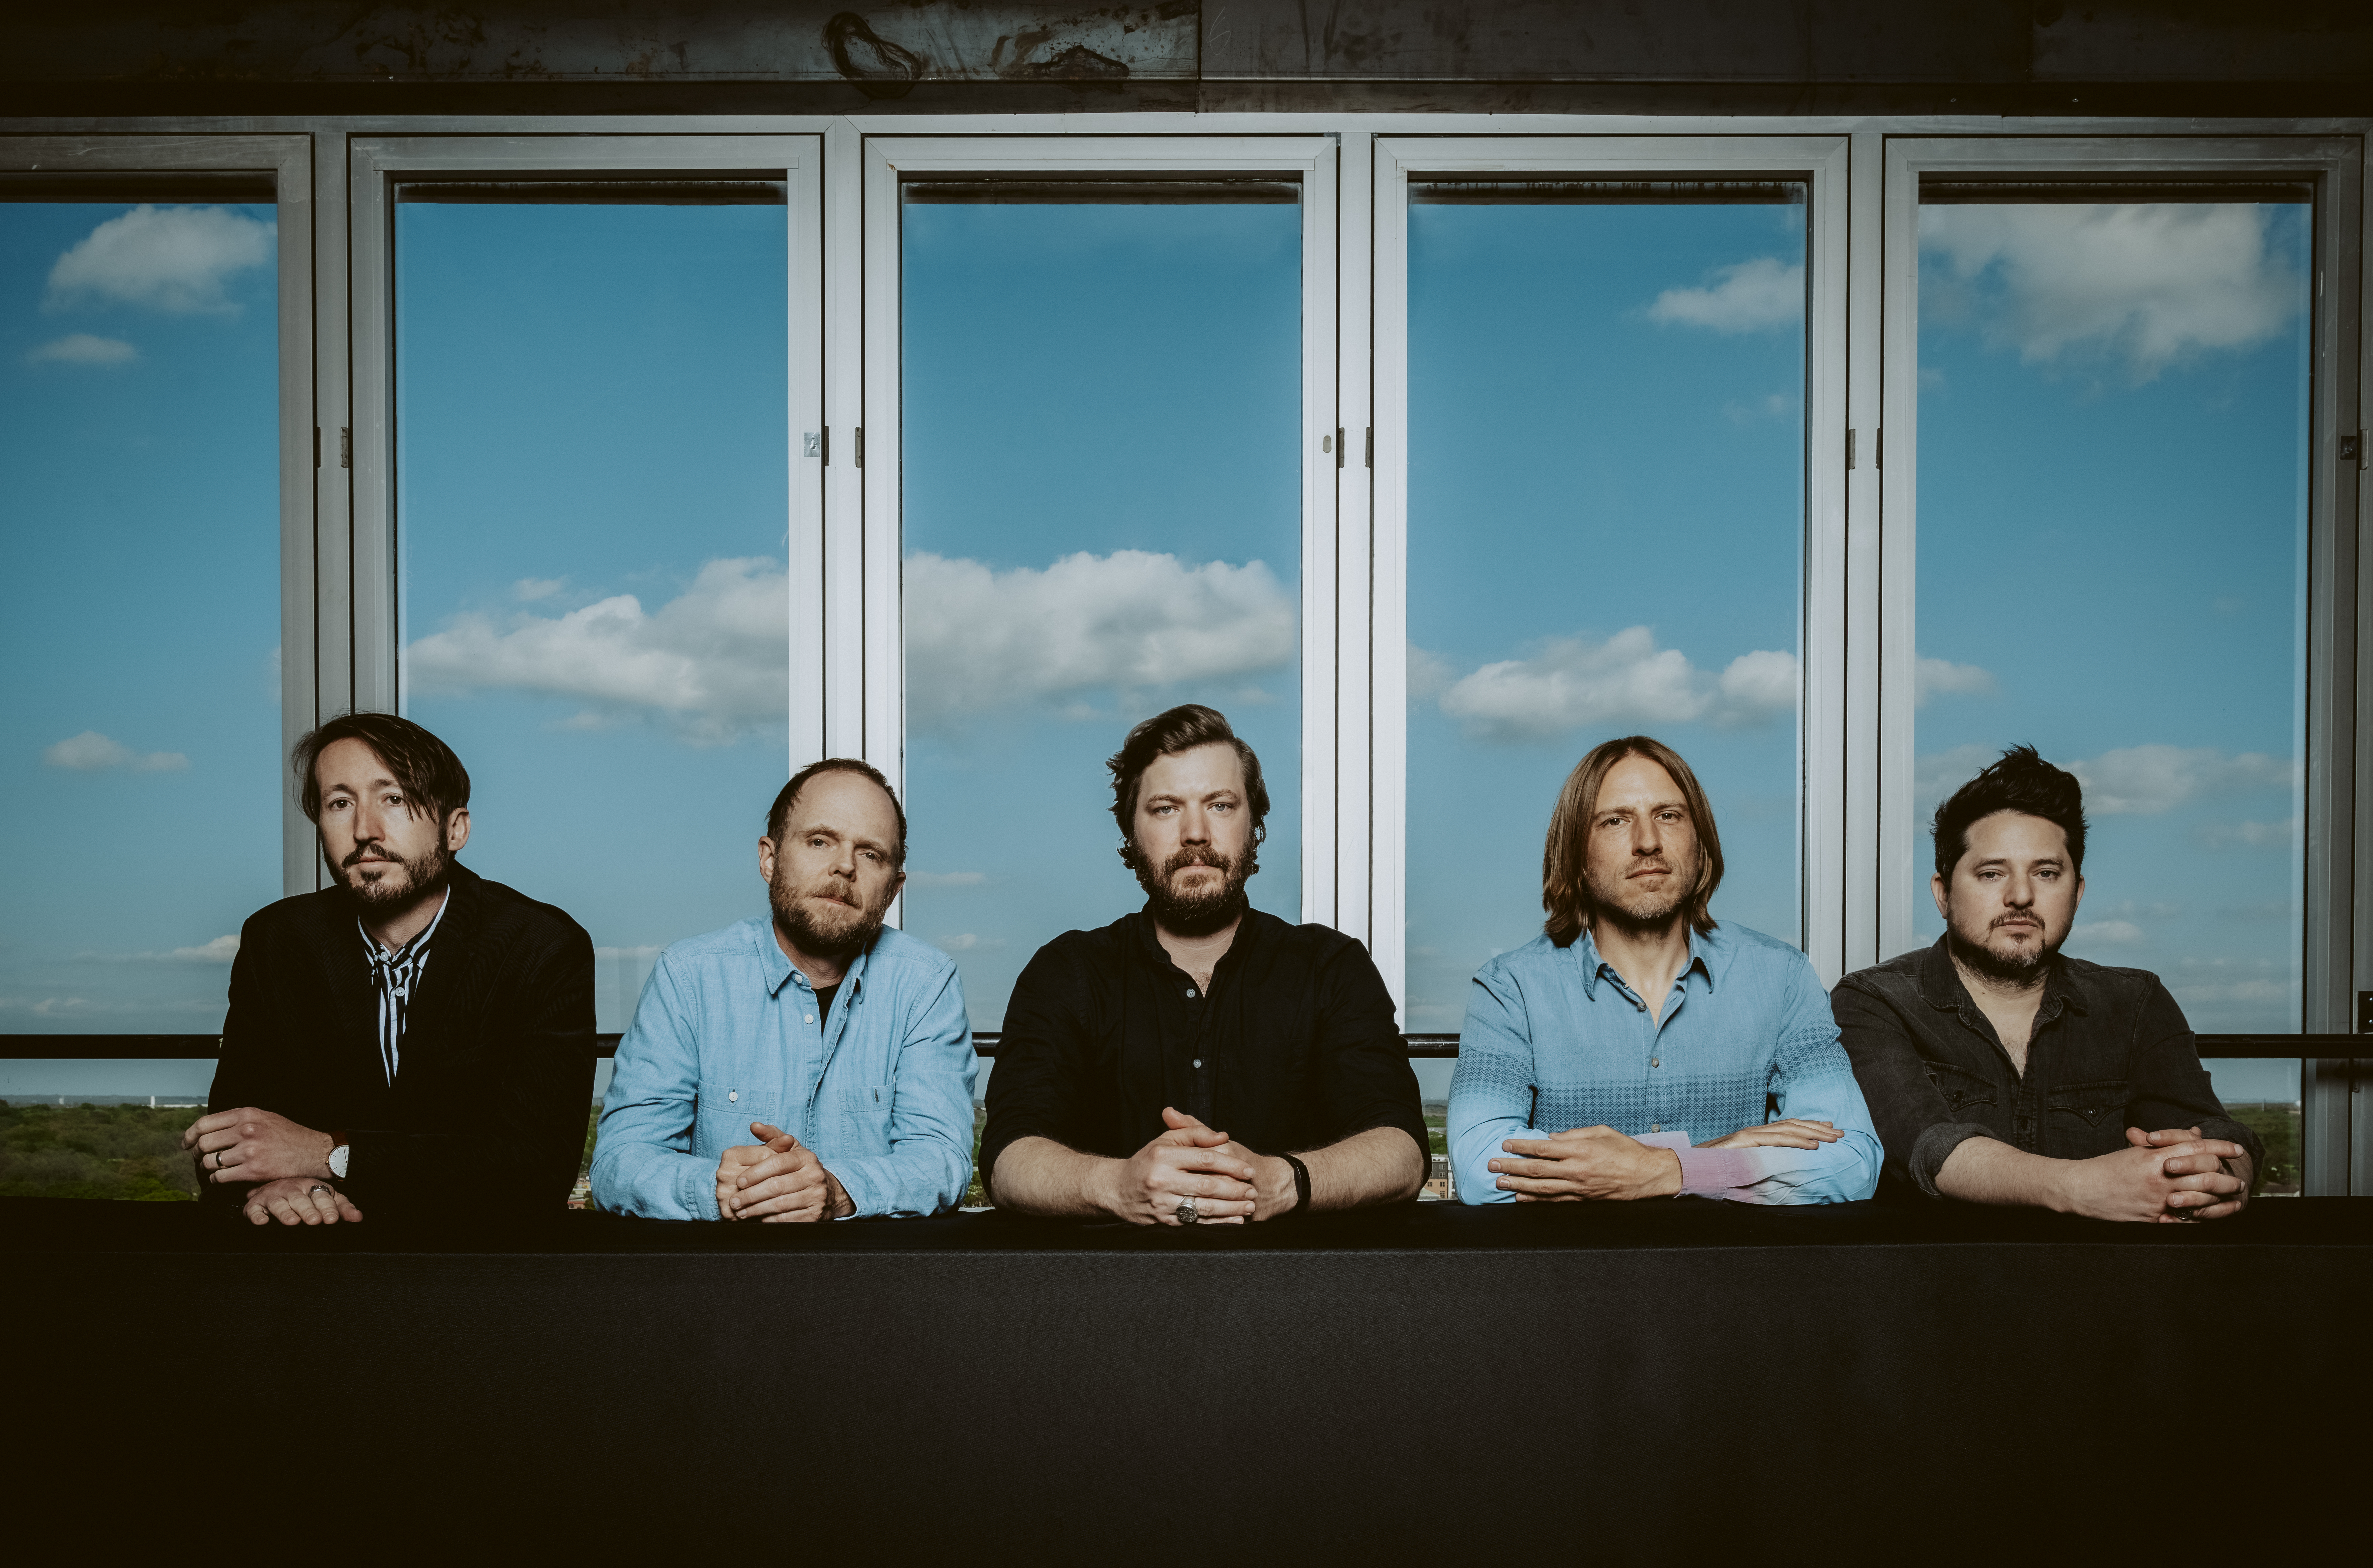 The five members of Midlake are in front of large windows, with blue sky visible